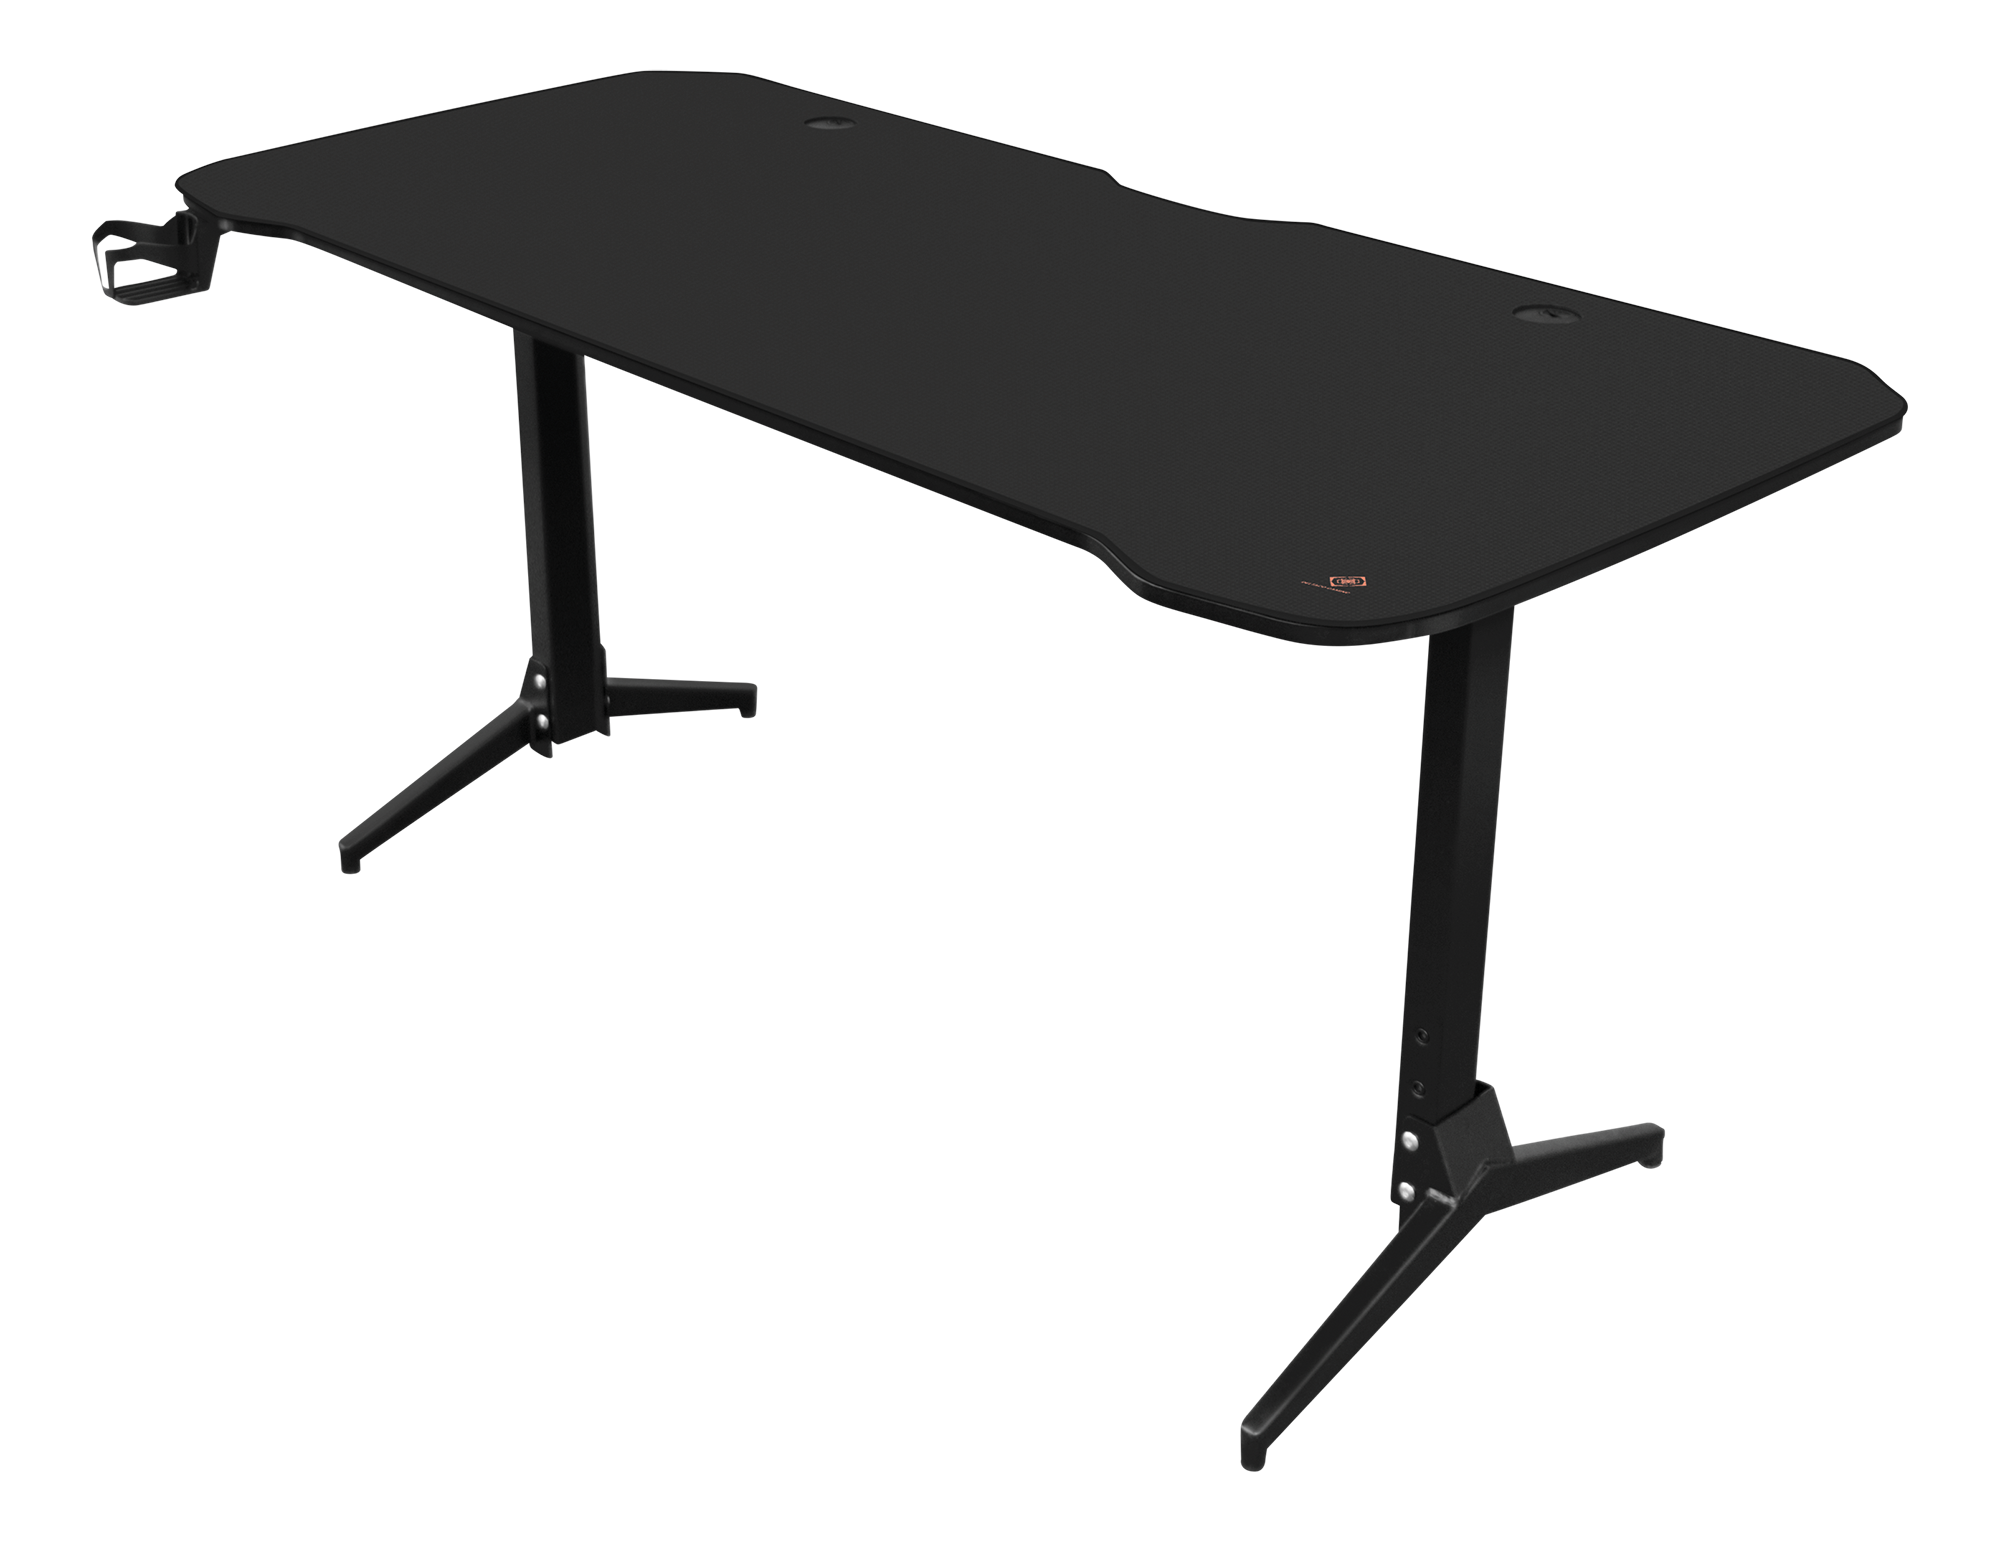 GAM-095V2, gaming table, mousepad, height adjustable, black